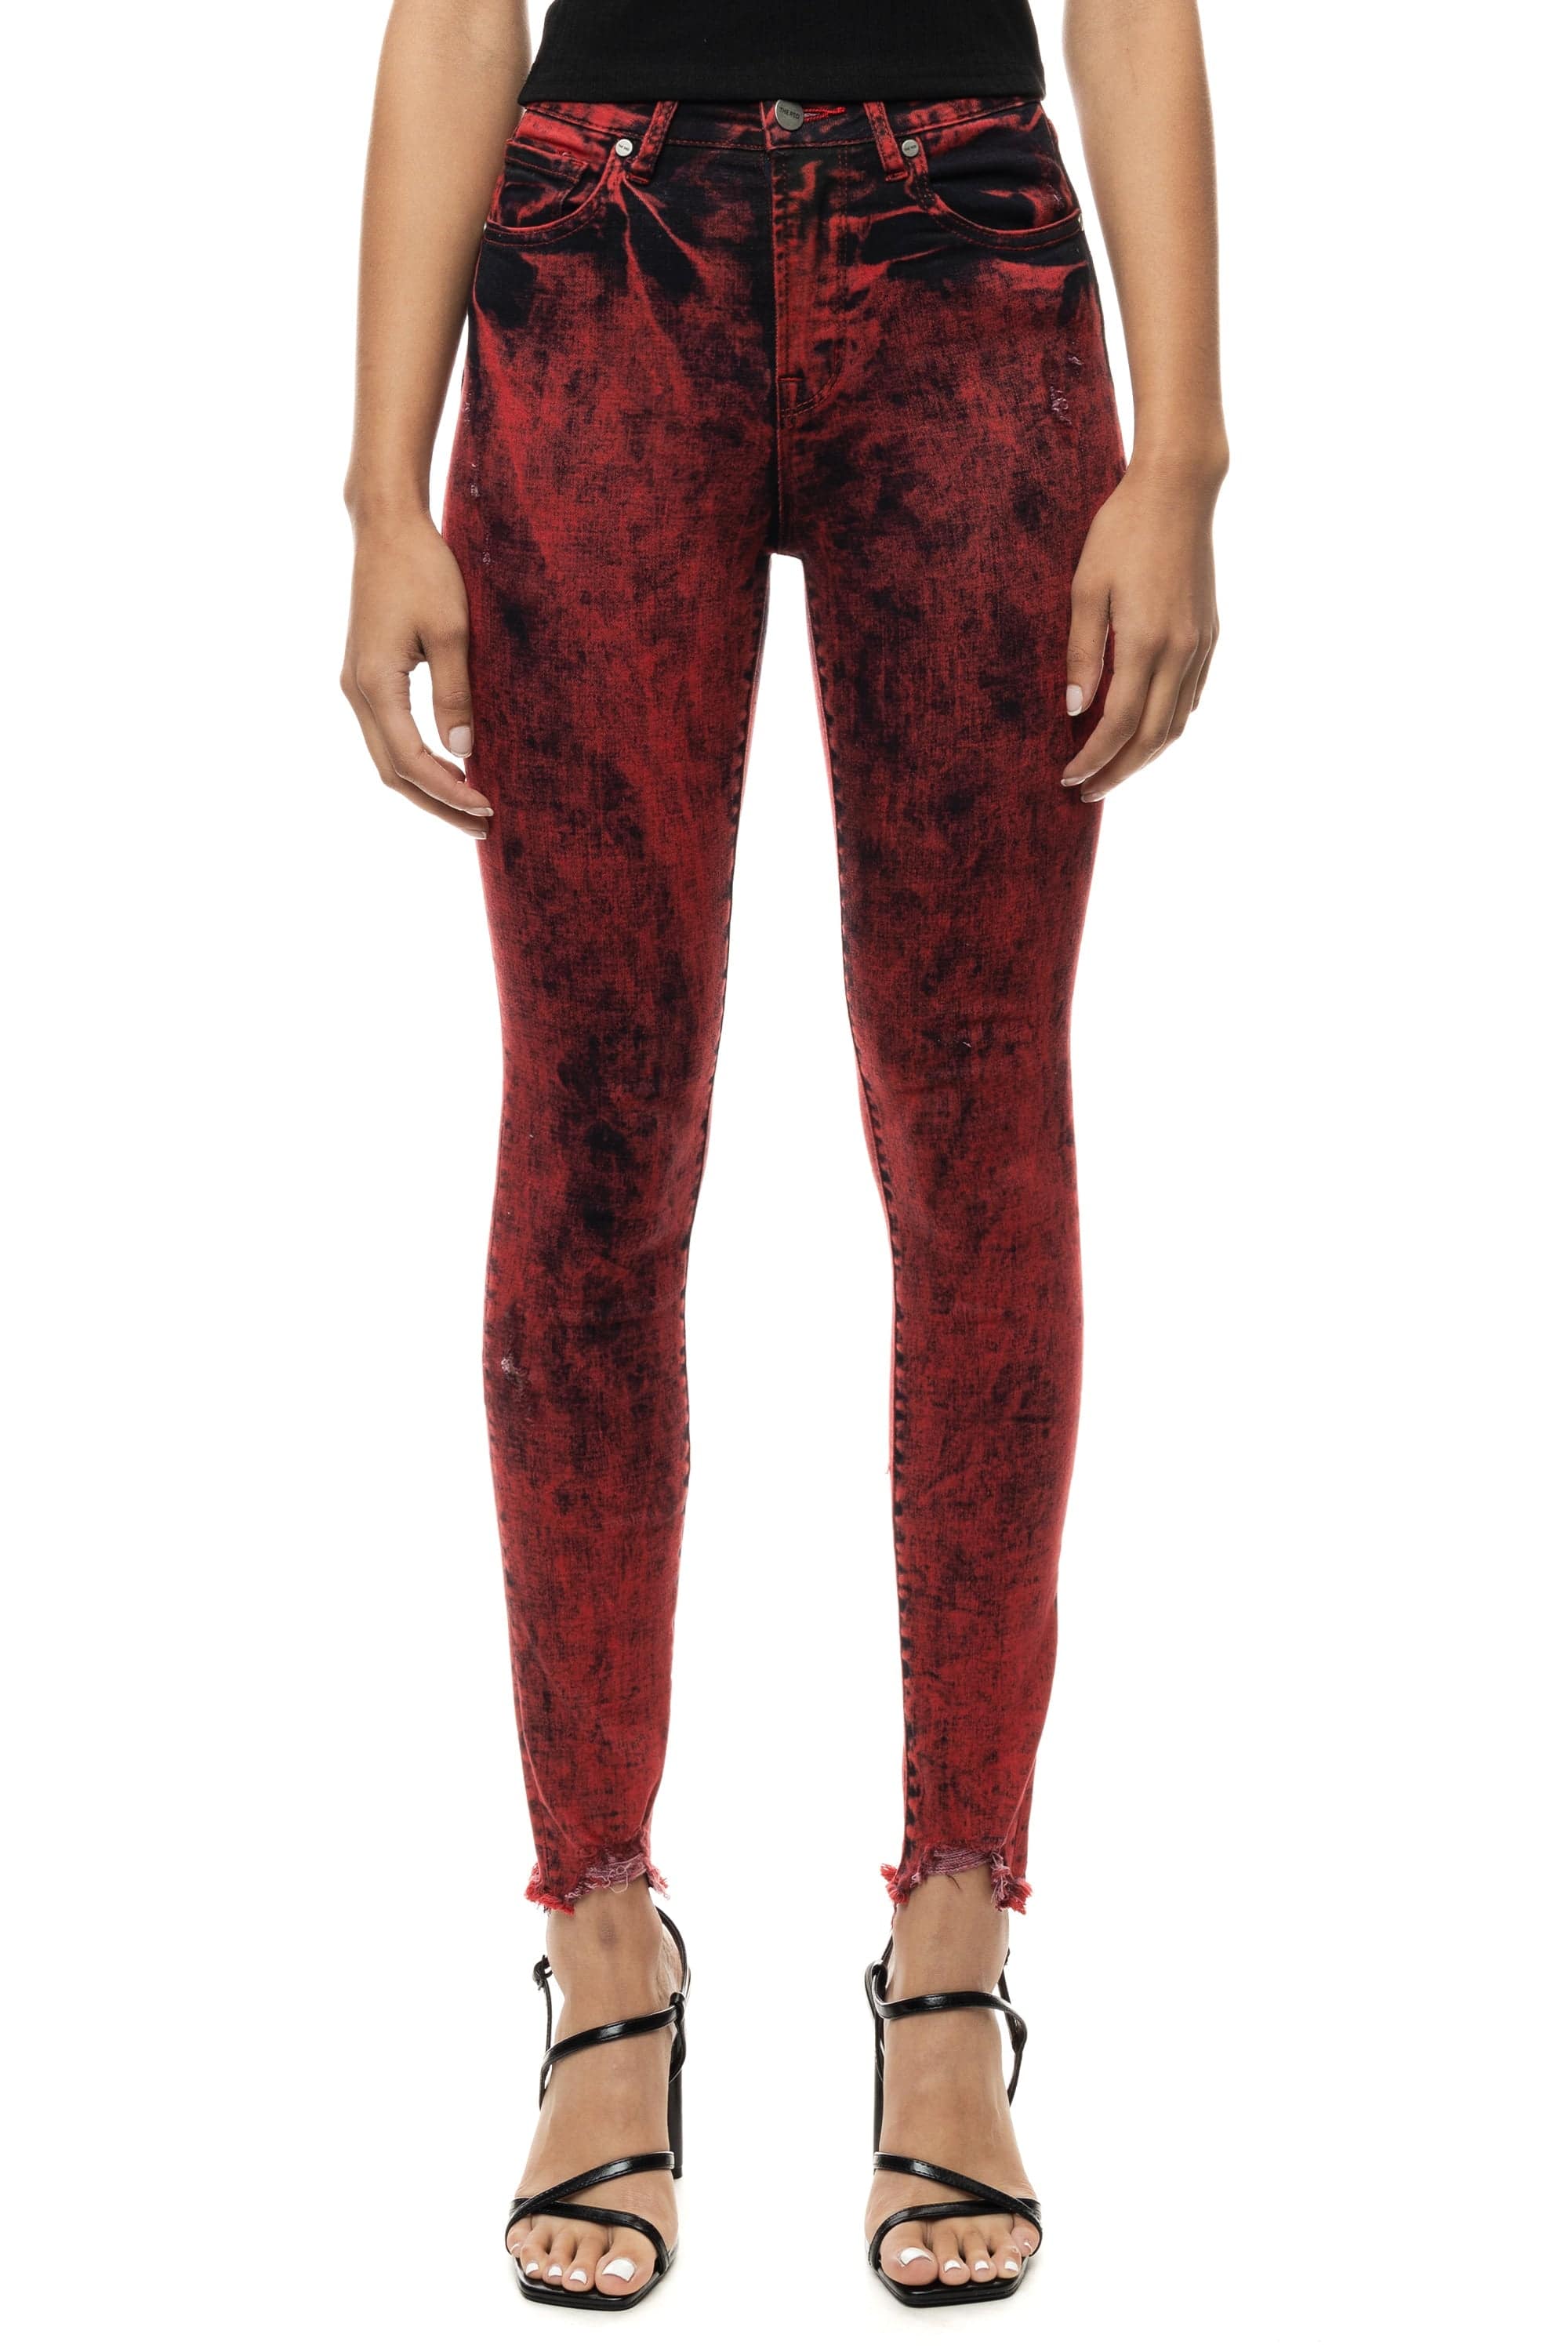 Over Dyed Fashion Denim Pants -Retro Red –